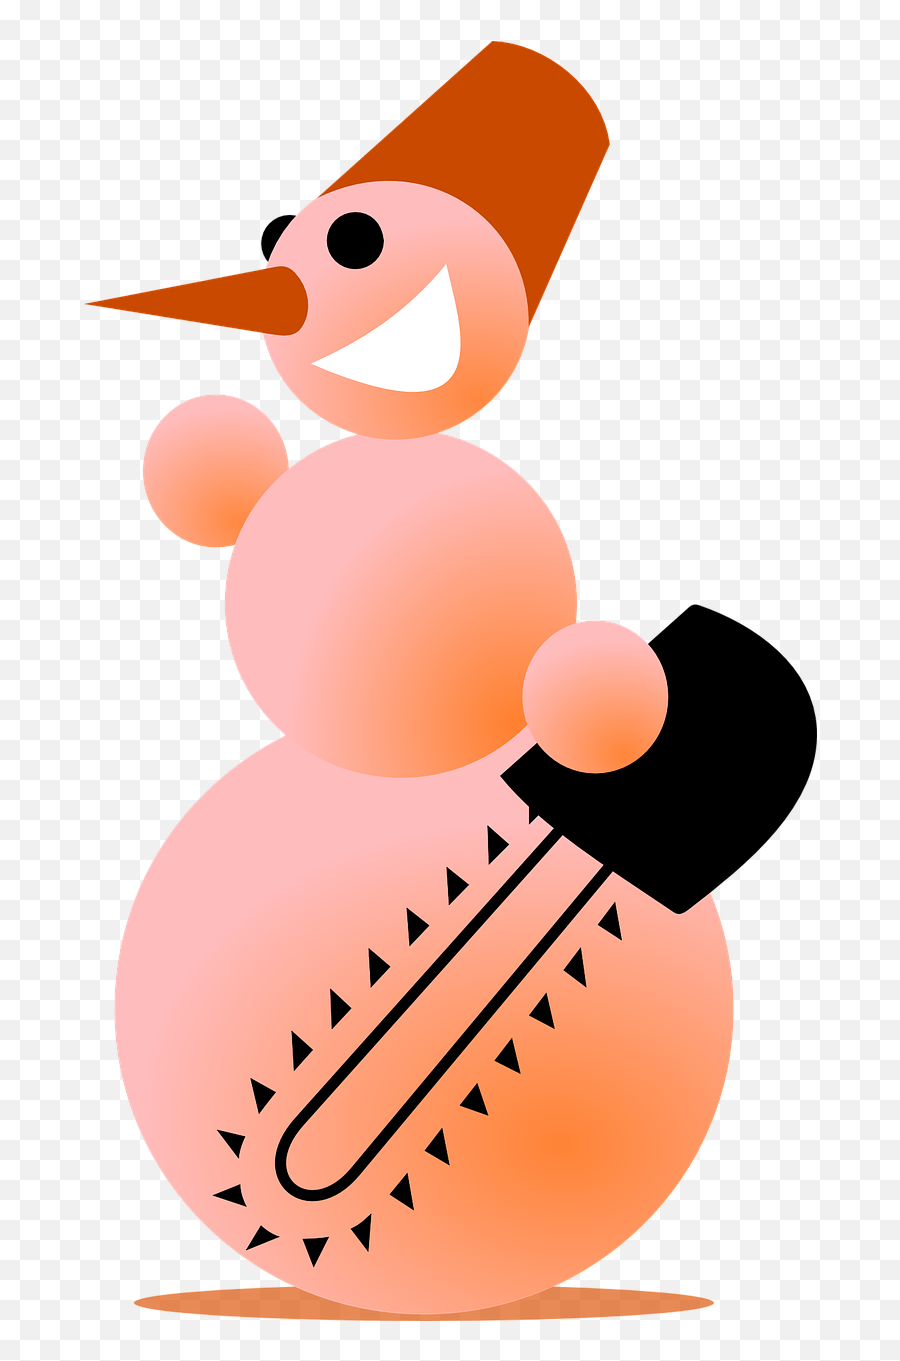 Snowman Psycho Chainsaw - Free Vector Graphic On Pixabay Clip Art Png,Psycho Png